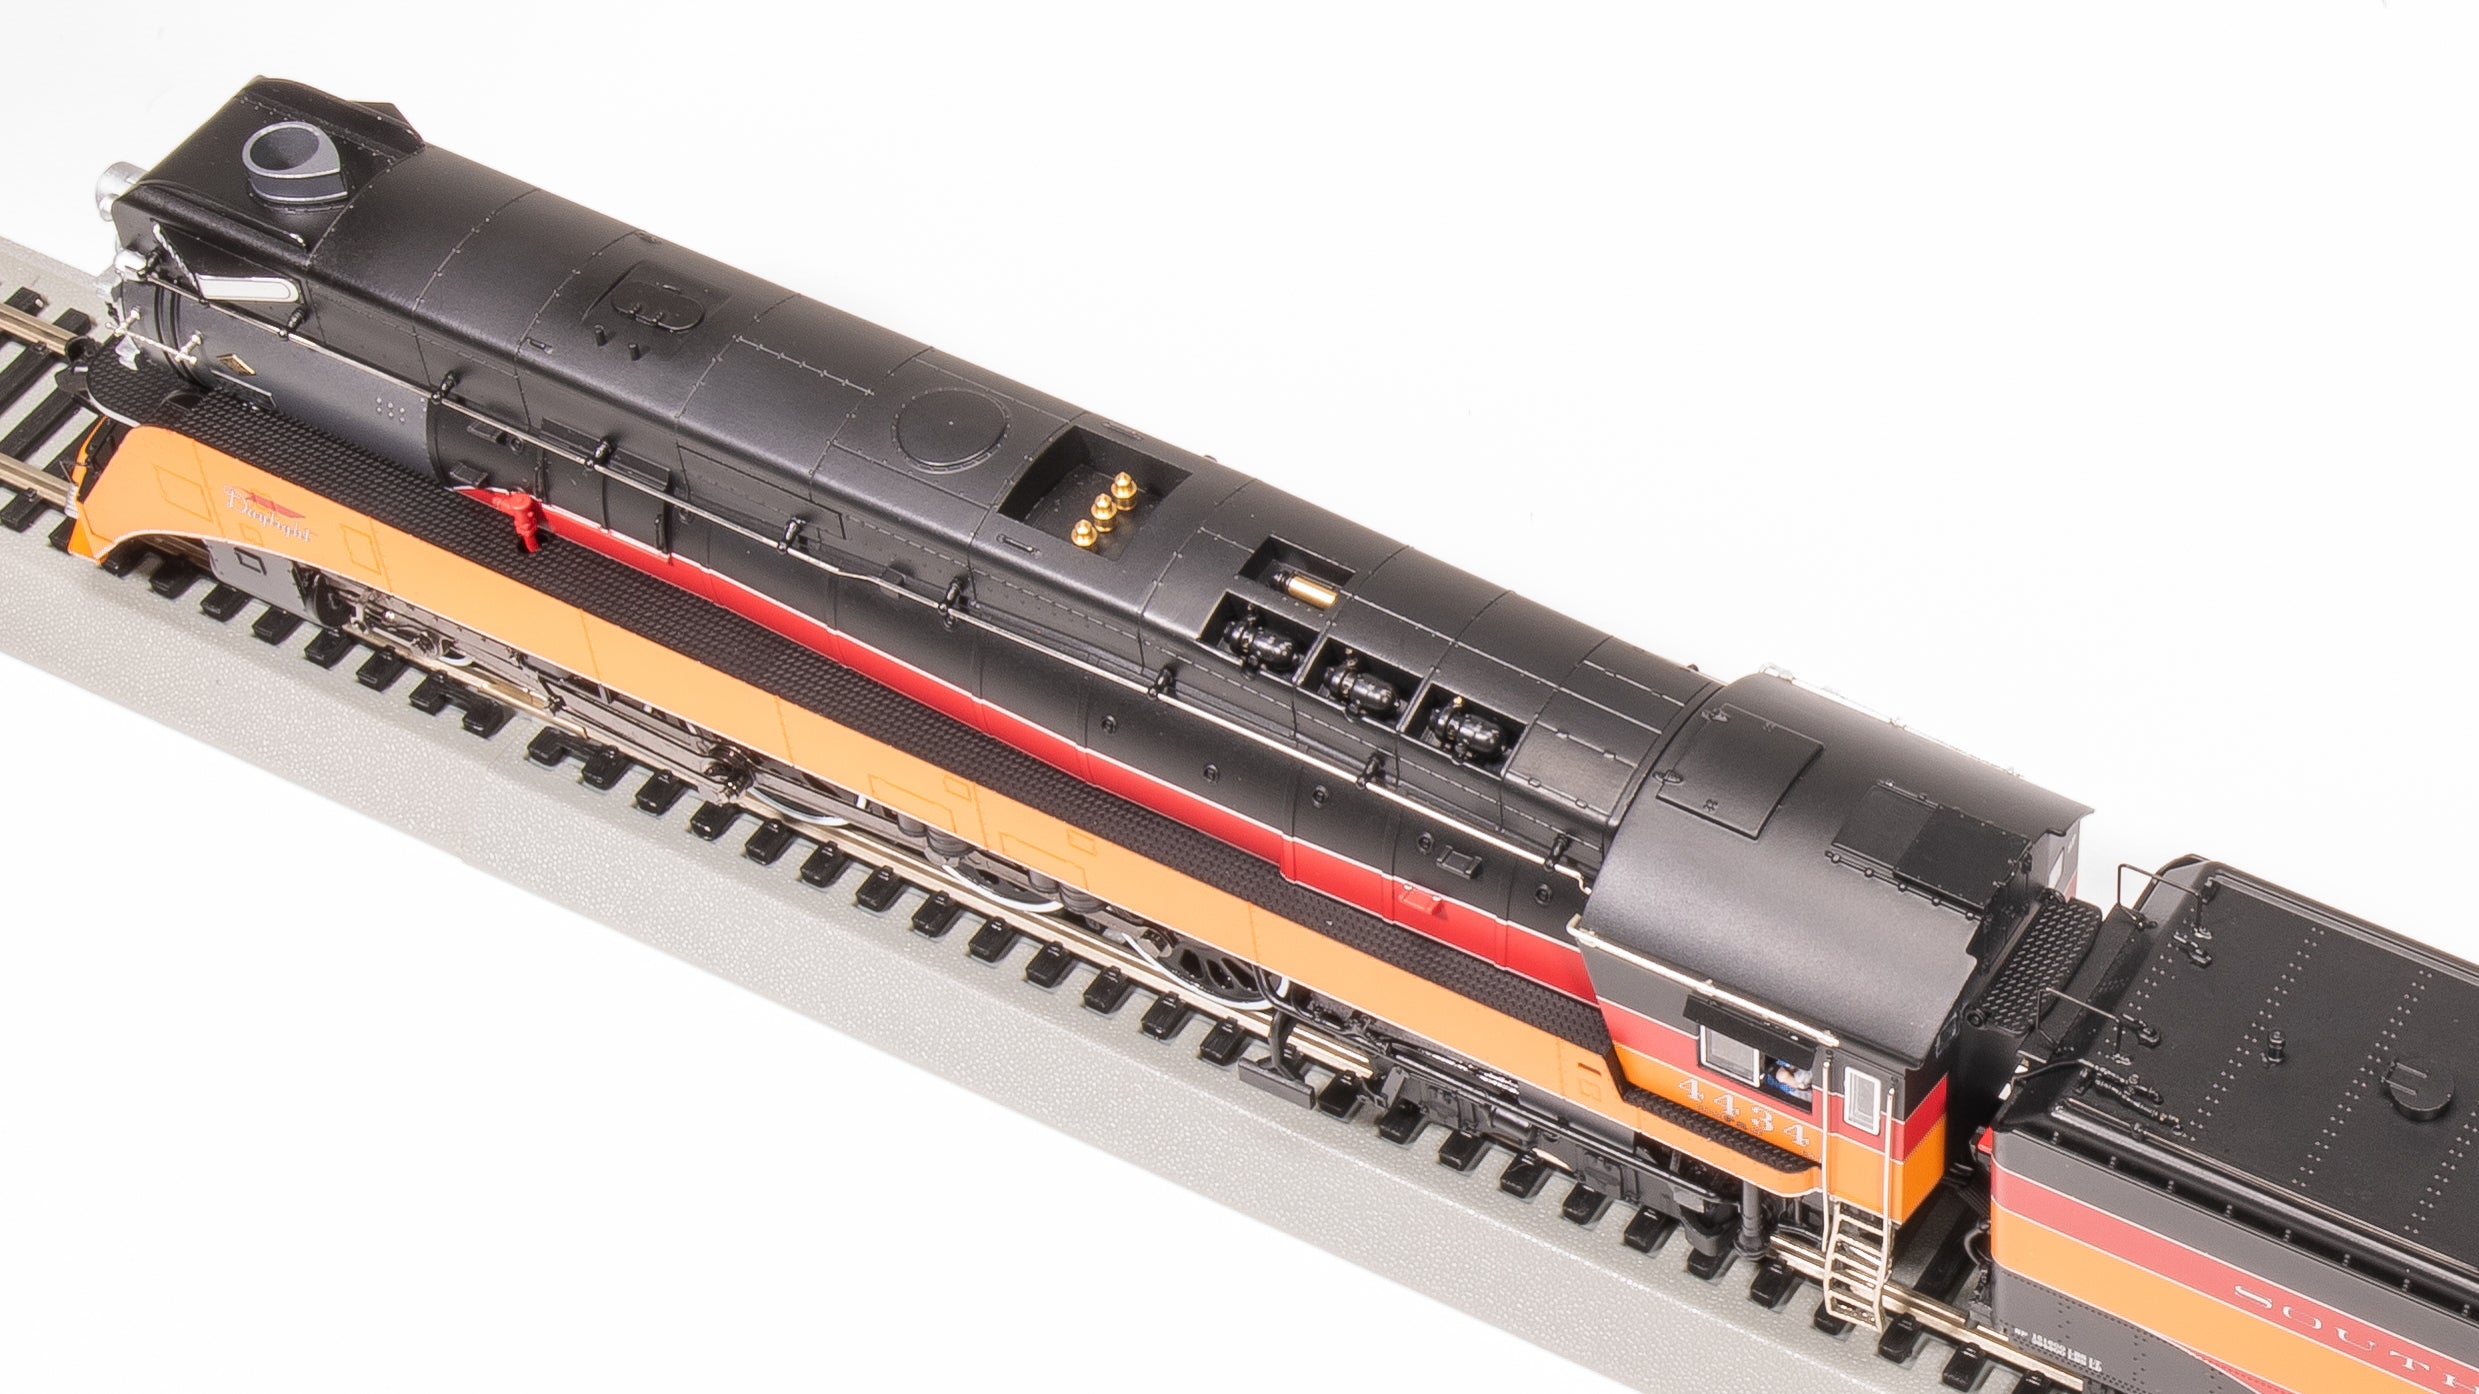 7613 Southern Pacific GS-4, #4434, In-Service, As-Delivered, Daylight Paint, Paragon4 Sound/DC/DCC, Smoke, HO